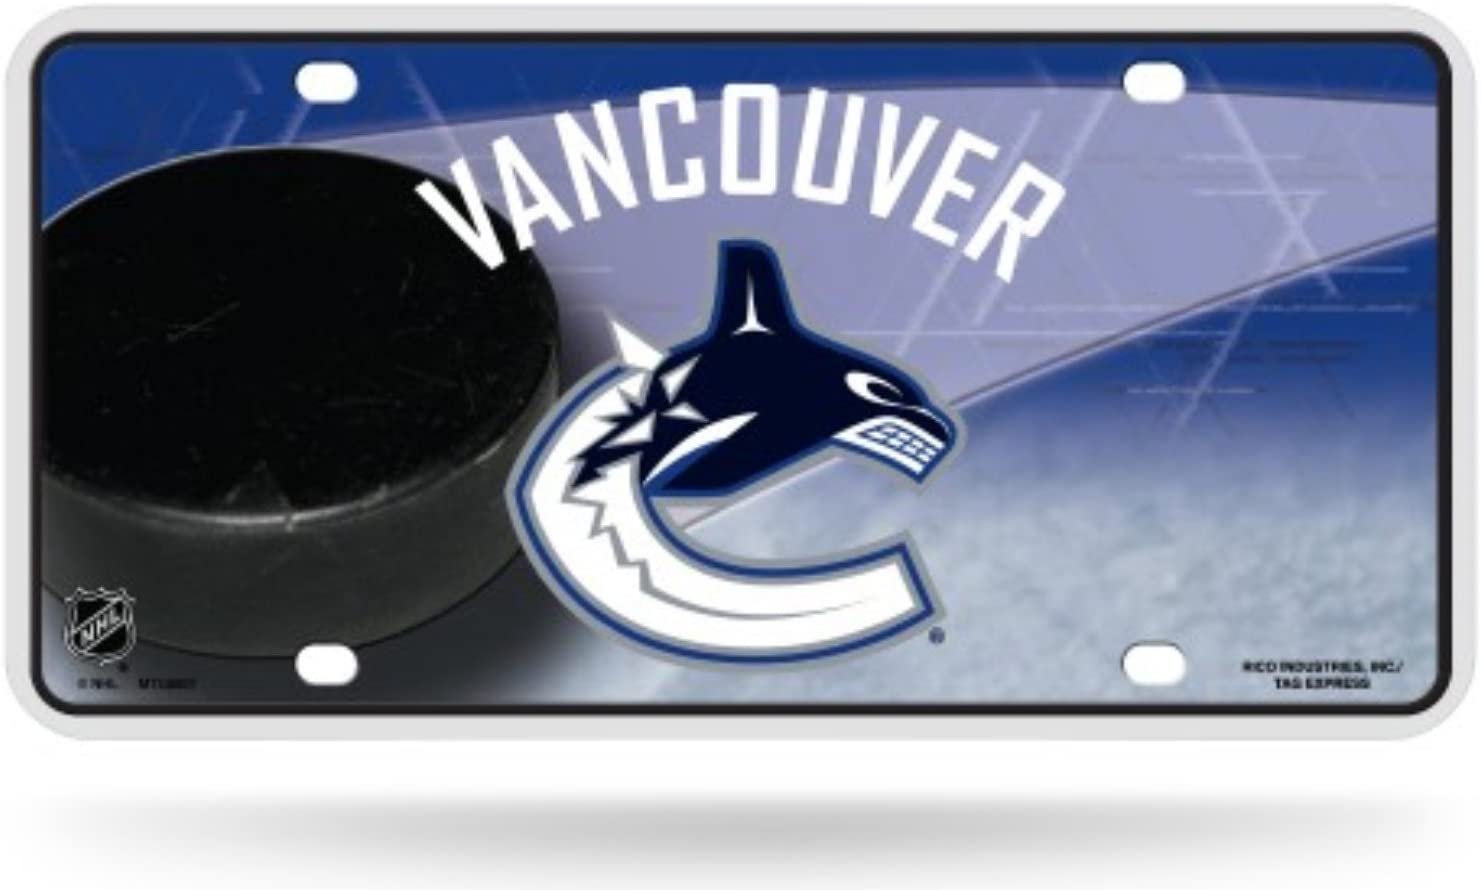 Vancouver Canucks Metal Auto Tag License Plate, Puck Design, 6x12 Inch